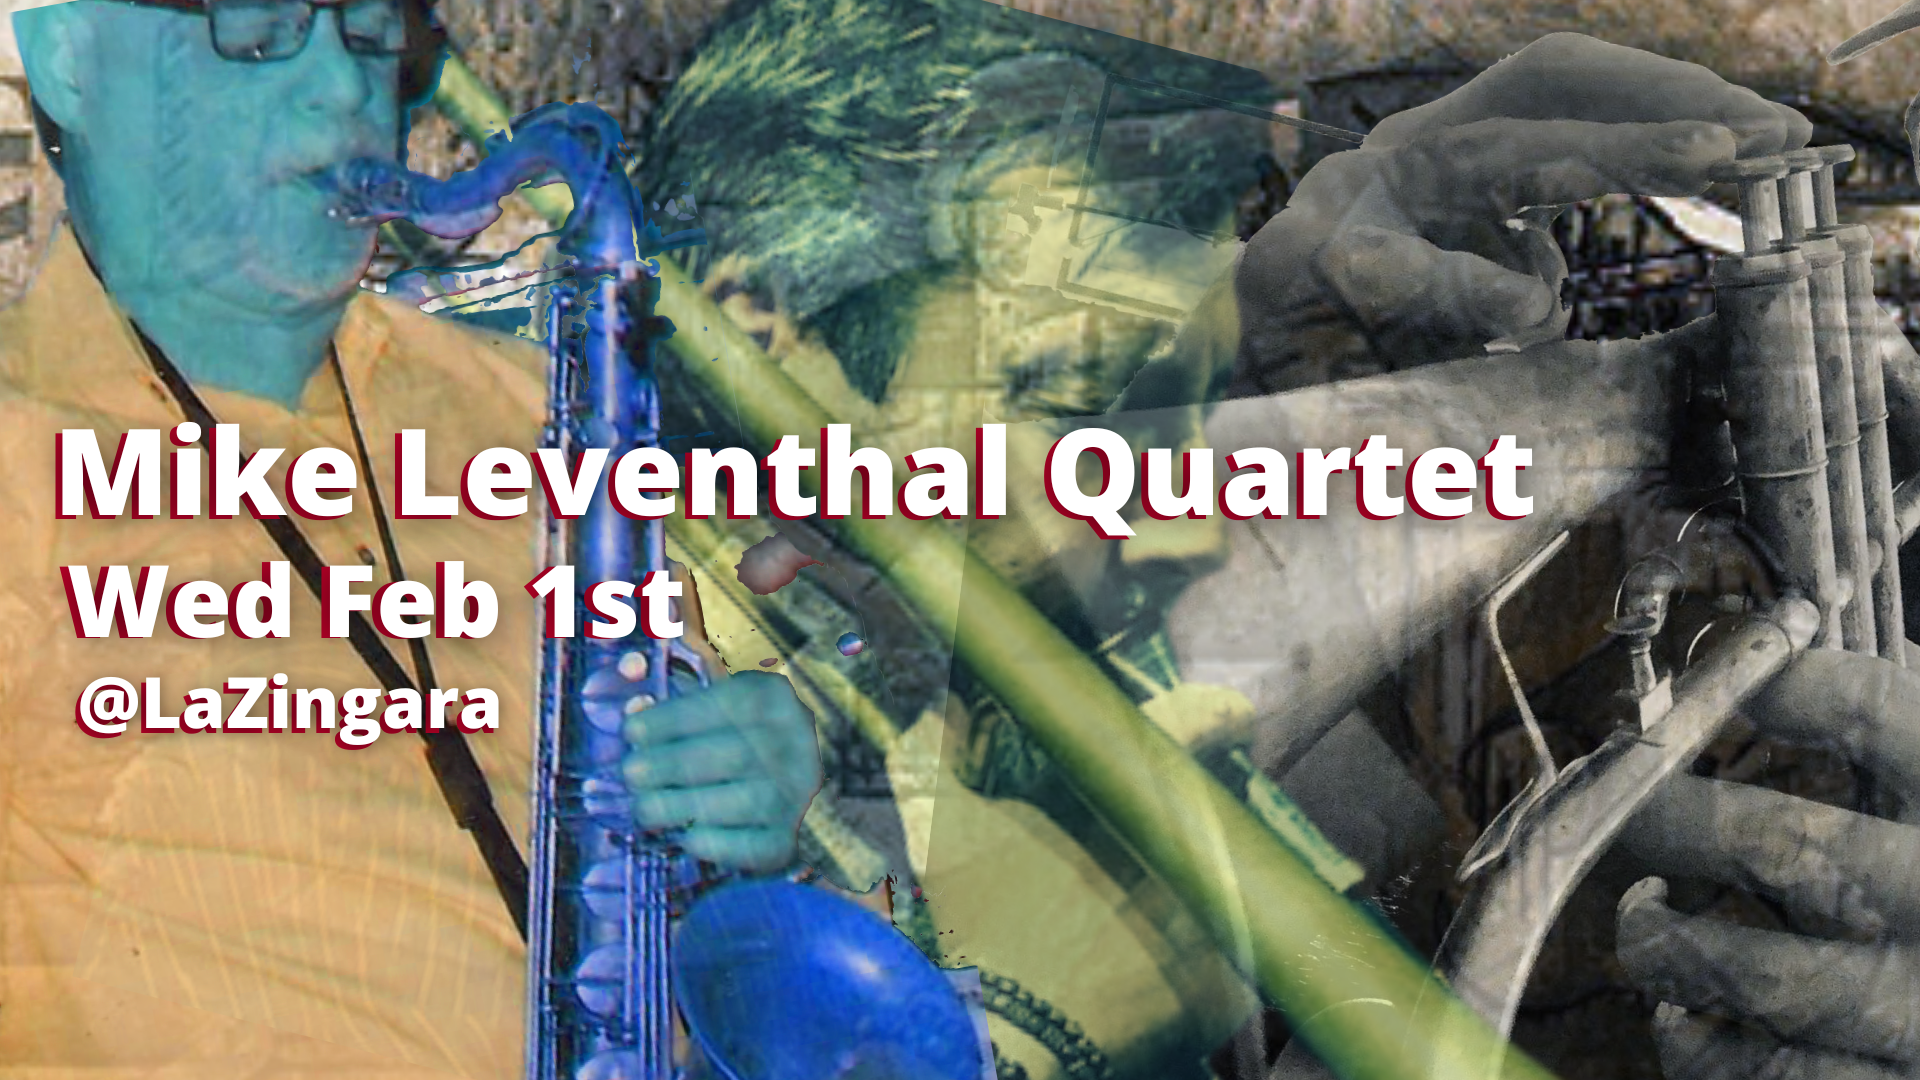 Mike Leventhal Quartet Takes The Bethel Jazz Stage At LaZingara  Featuring: Bassits Mike Nunno, Drummer Bob Leonard, Guitarist Chris Morrison And Mike Leventhal On Sax